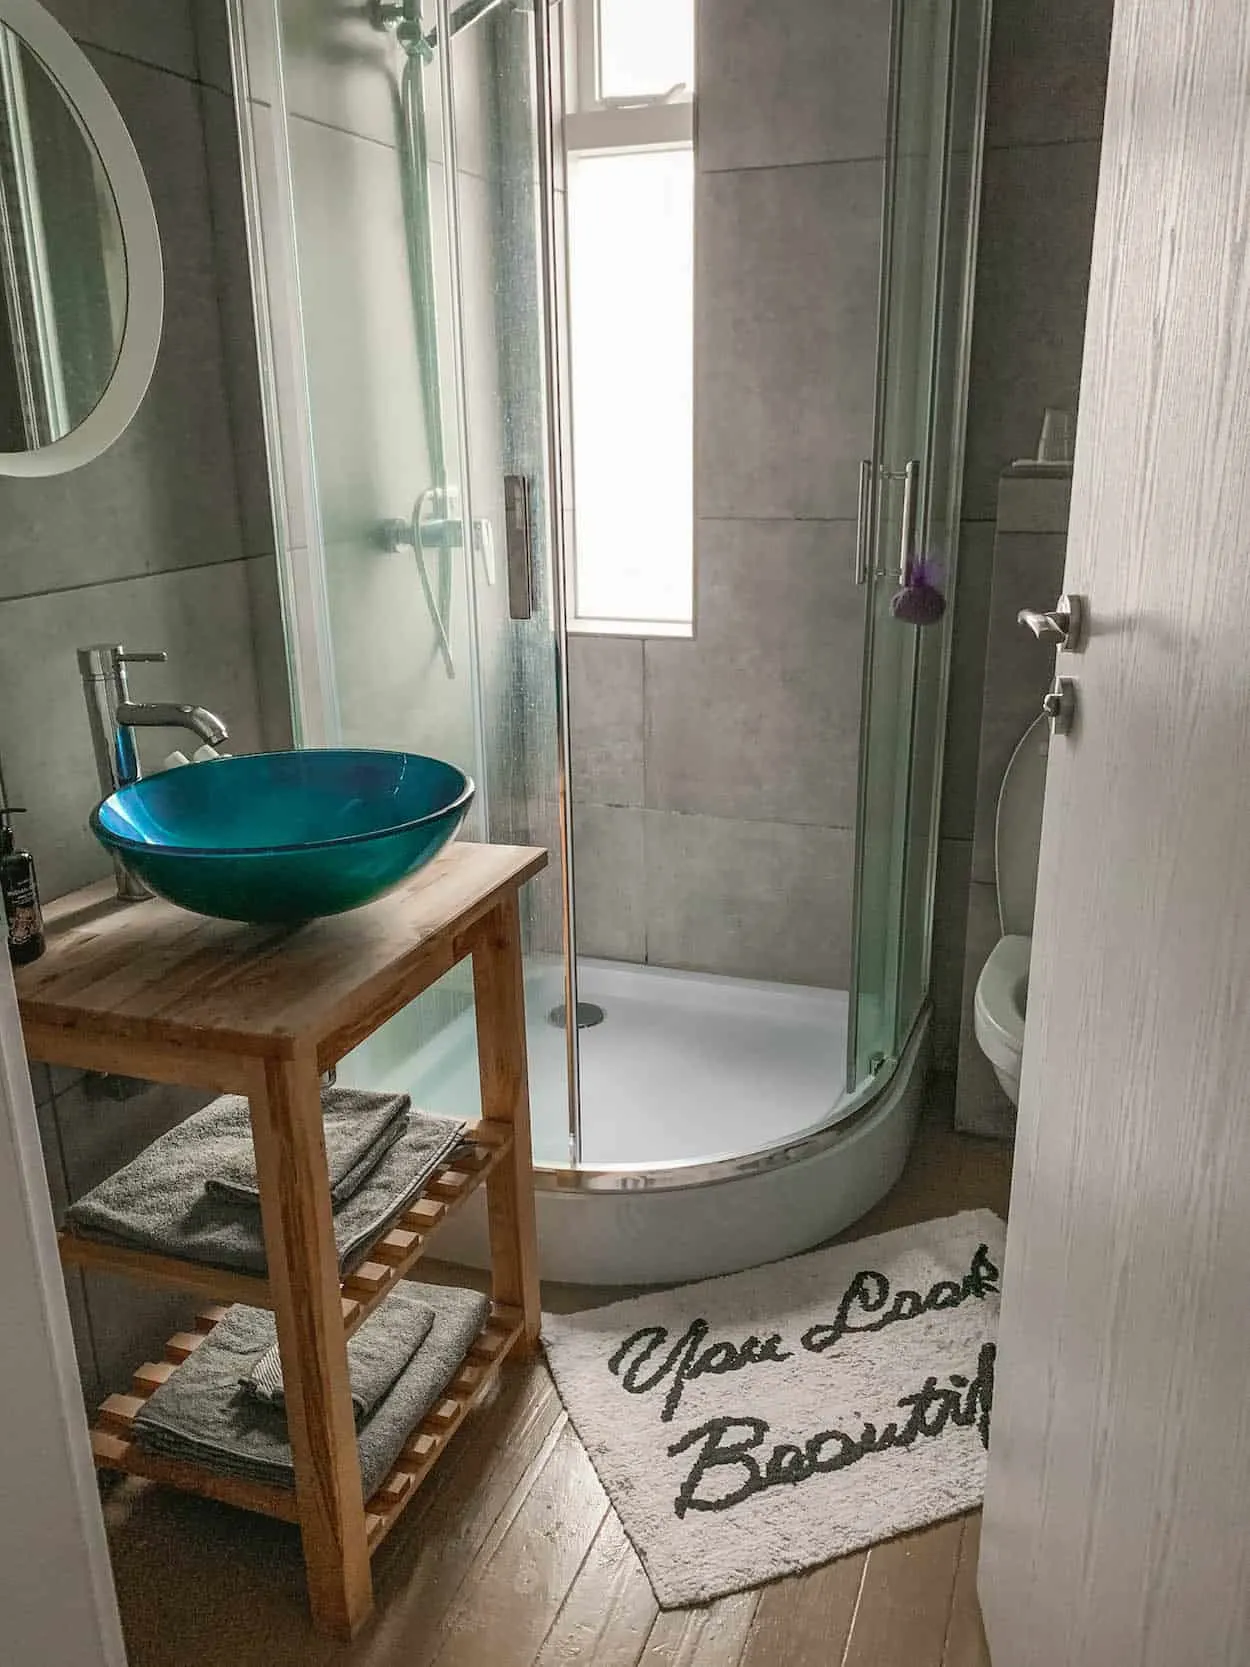 A modern renovated bathroom inside an Airbnb in Iceland